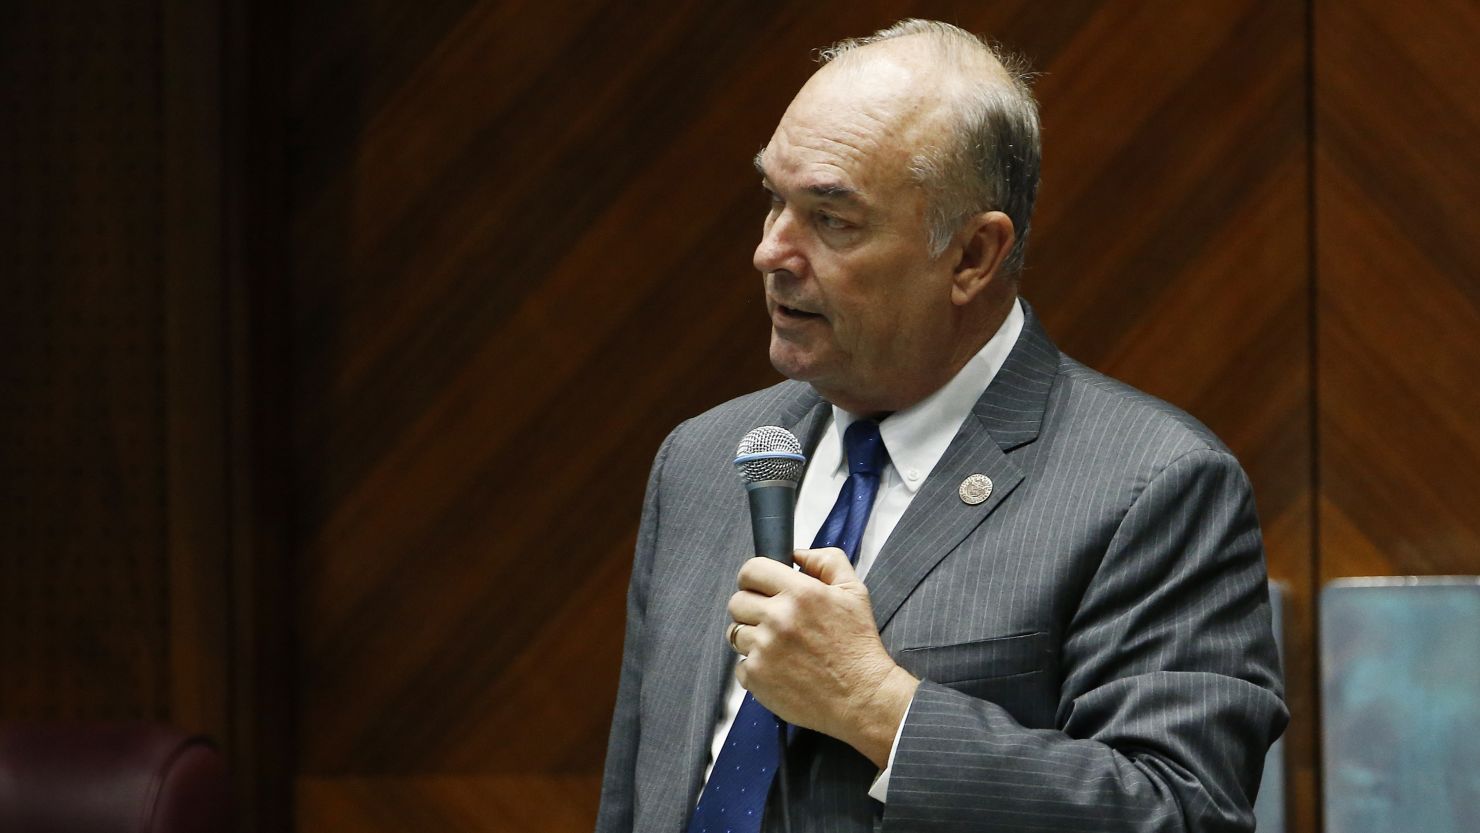 Arizona state Rep. Don Shooter, R-Yuma, reads a statement regarding sexual harassment and other misconduct complaints made against him by Rep. Michelle Ugenti-Rita and others, on the House floor at the Capitol in Phoenix. (AP Photo/Ross D. Franklin, File)